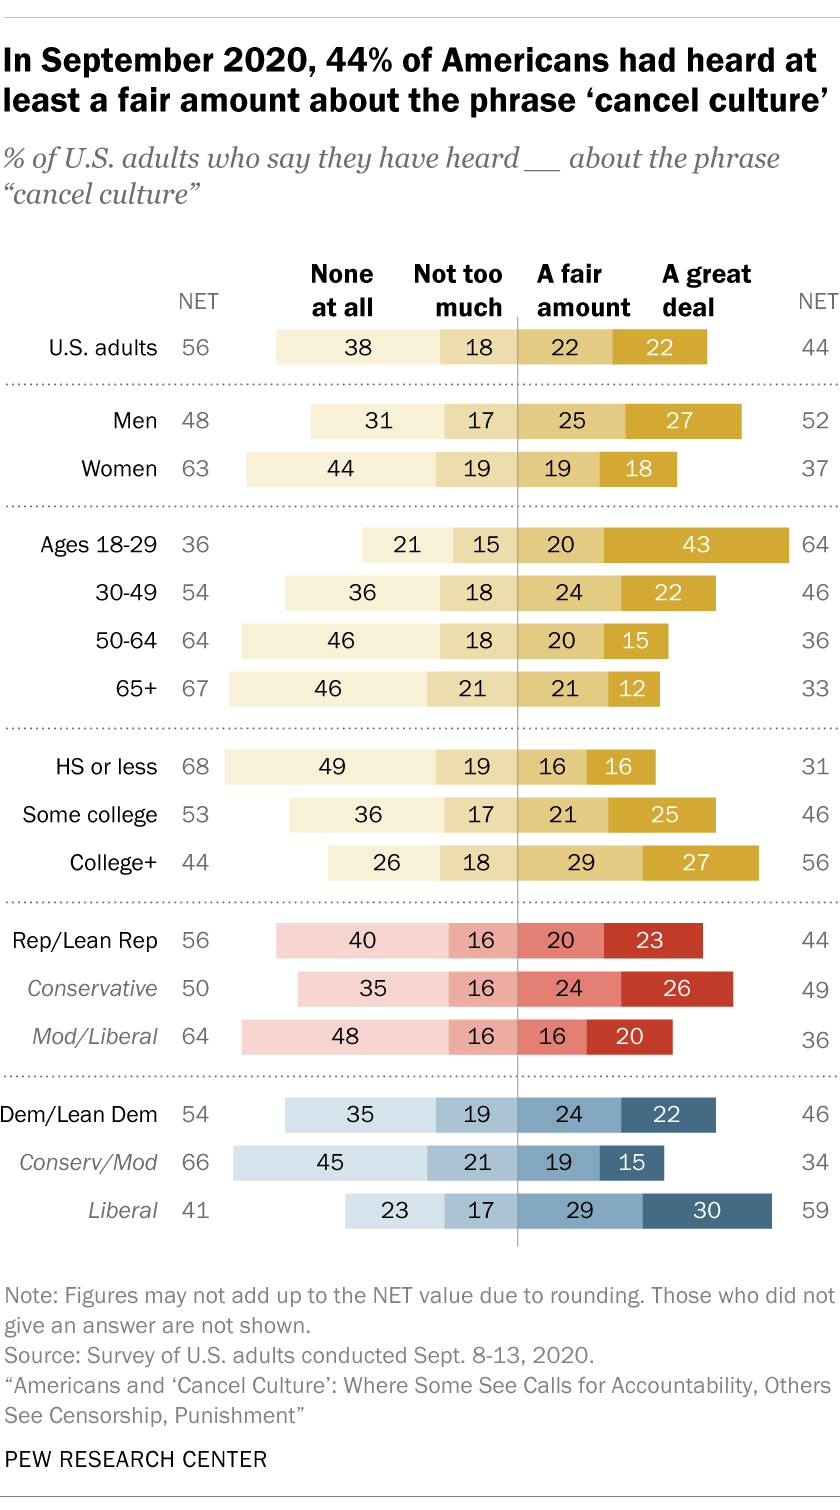 PEW research center statistics on cancel culture